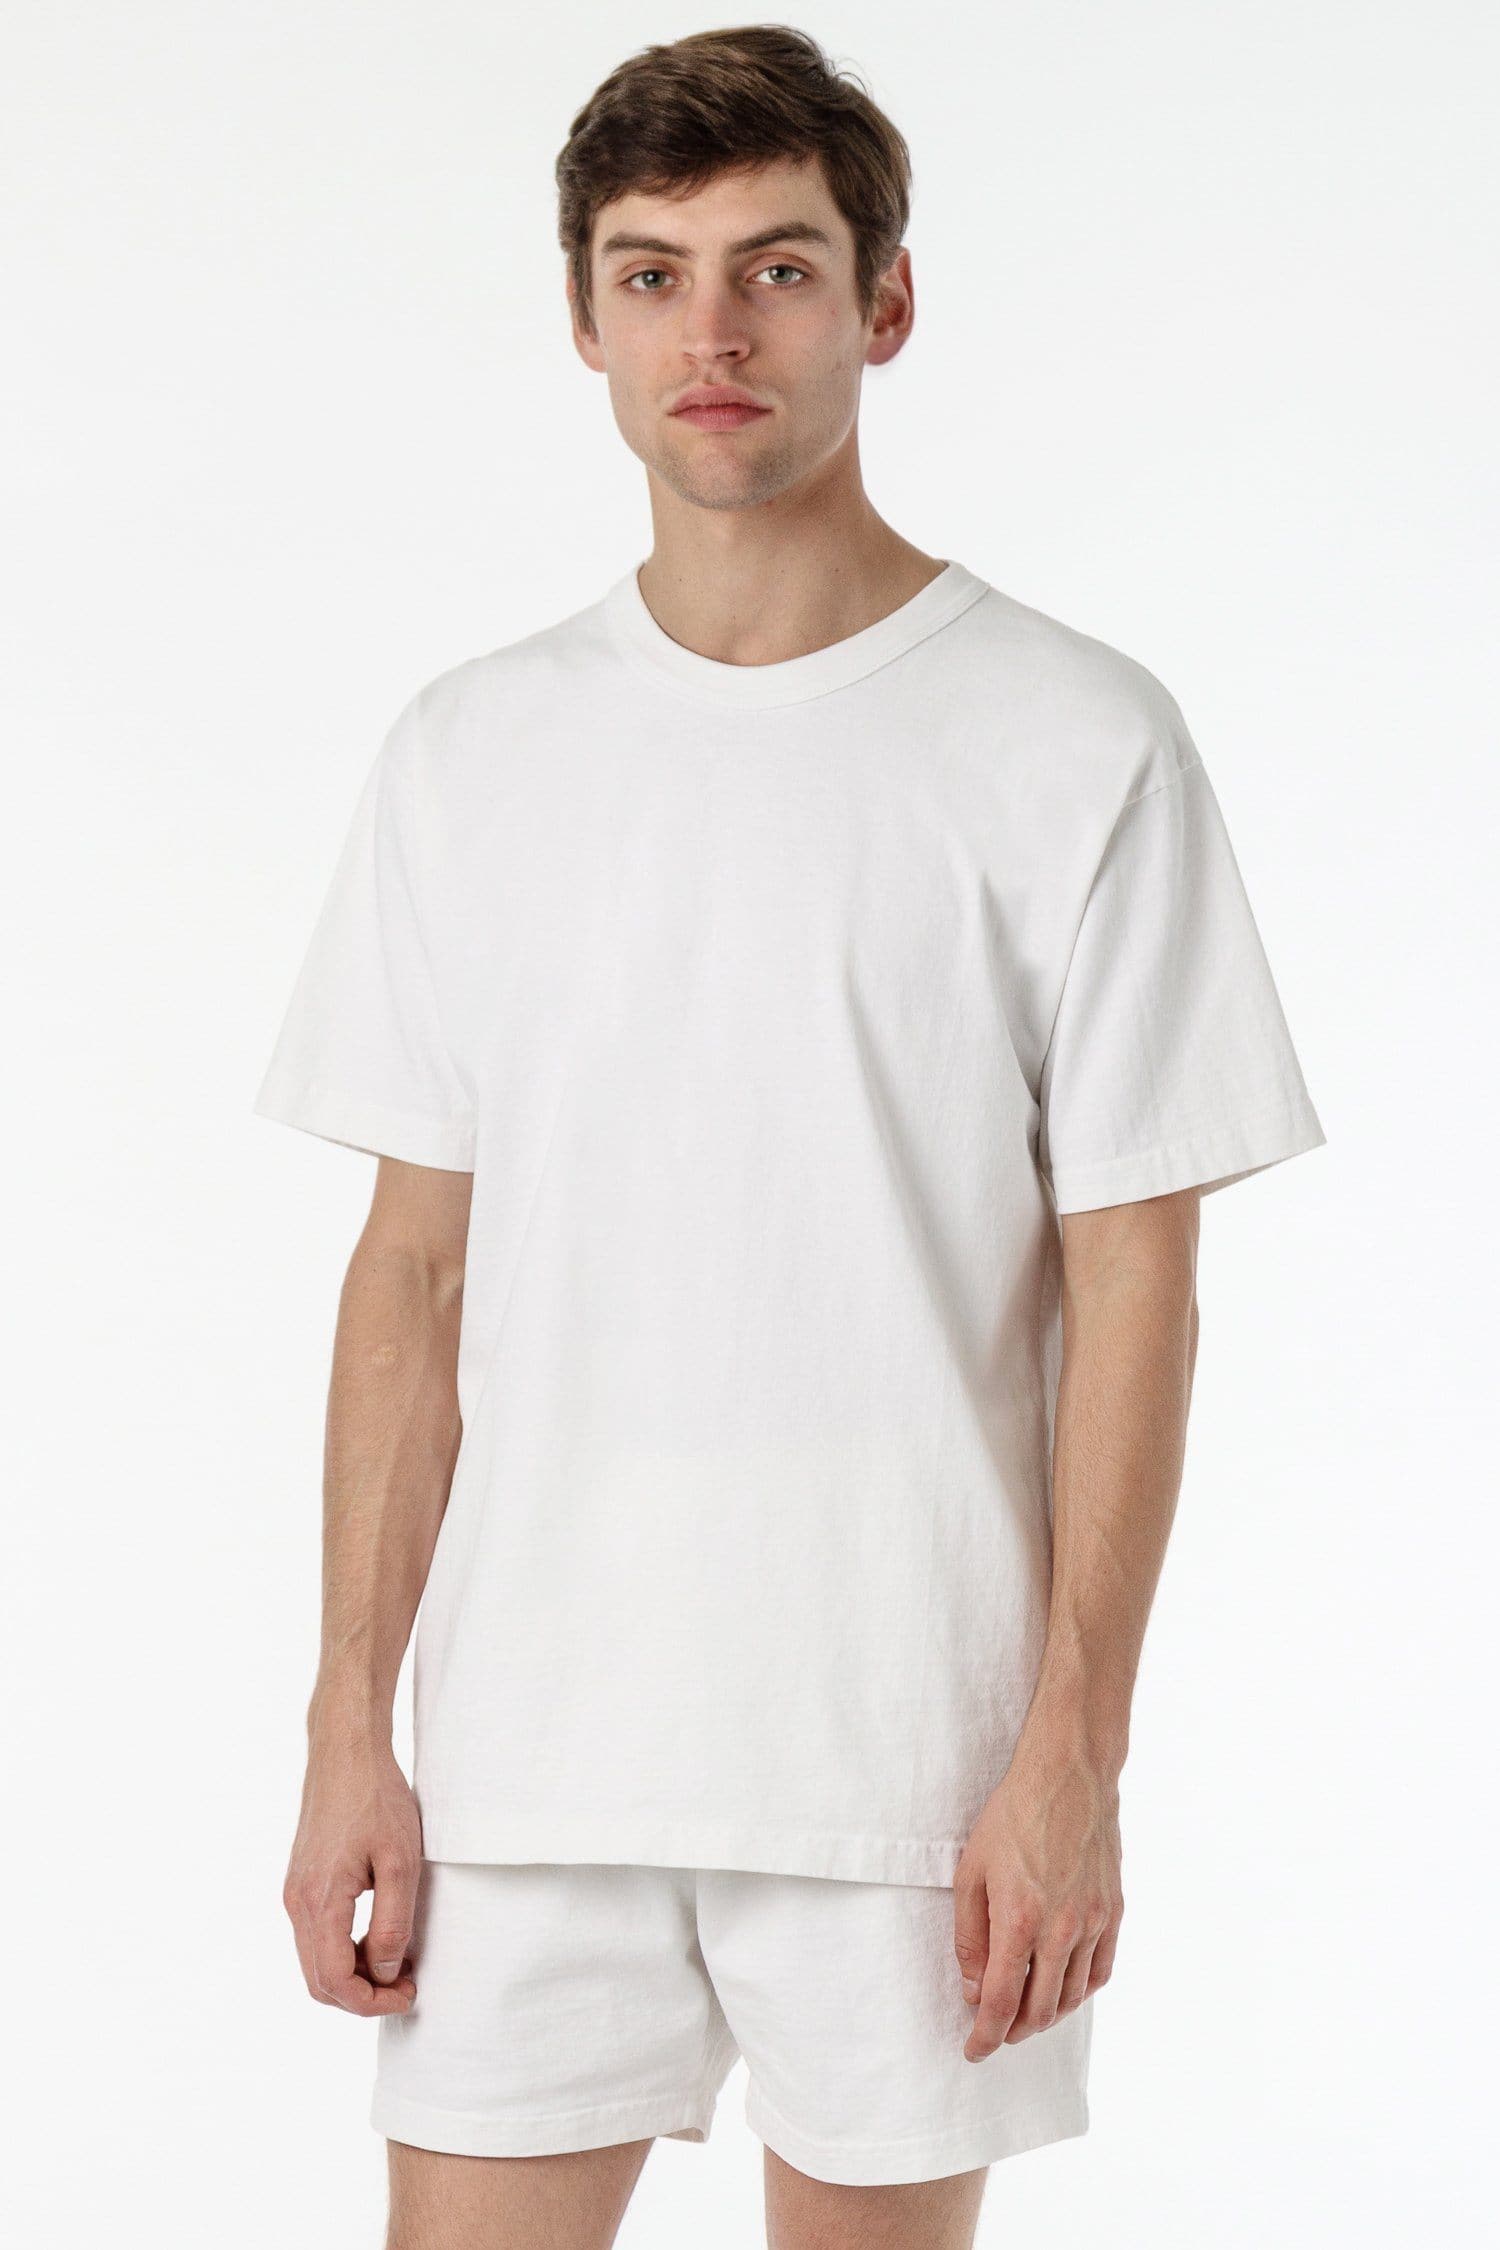 Buy Los Angeles Latest White Printed T Shirt for Men. Genuine and Smooth  Fabric. (Medium) at